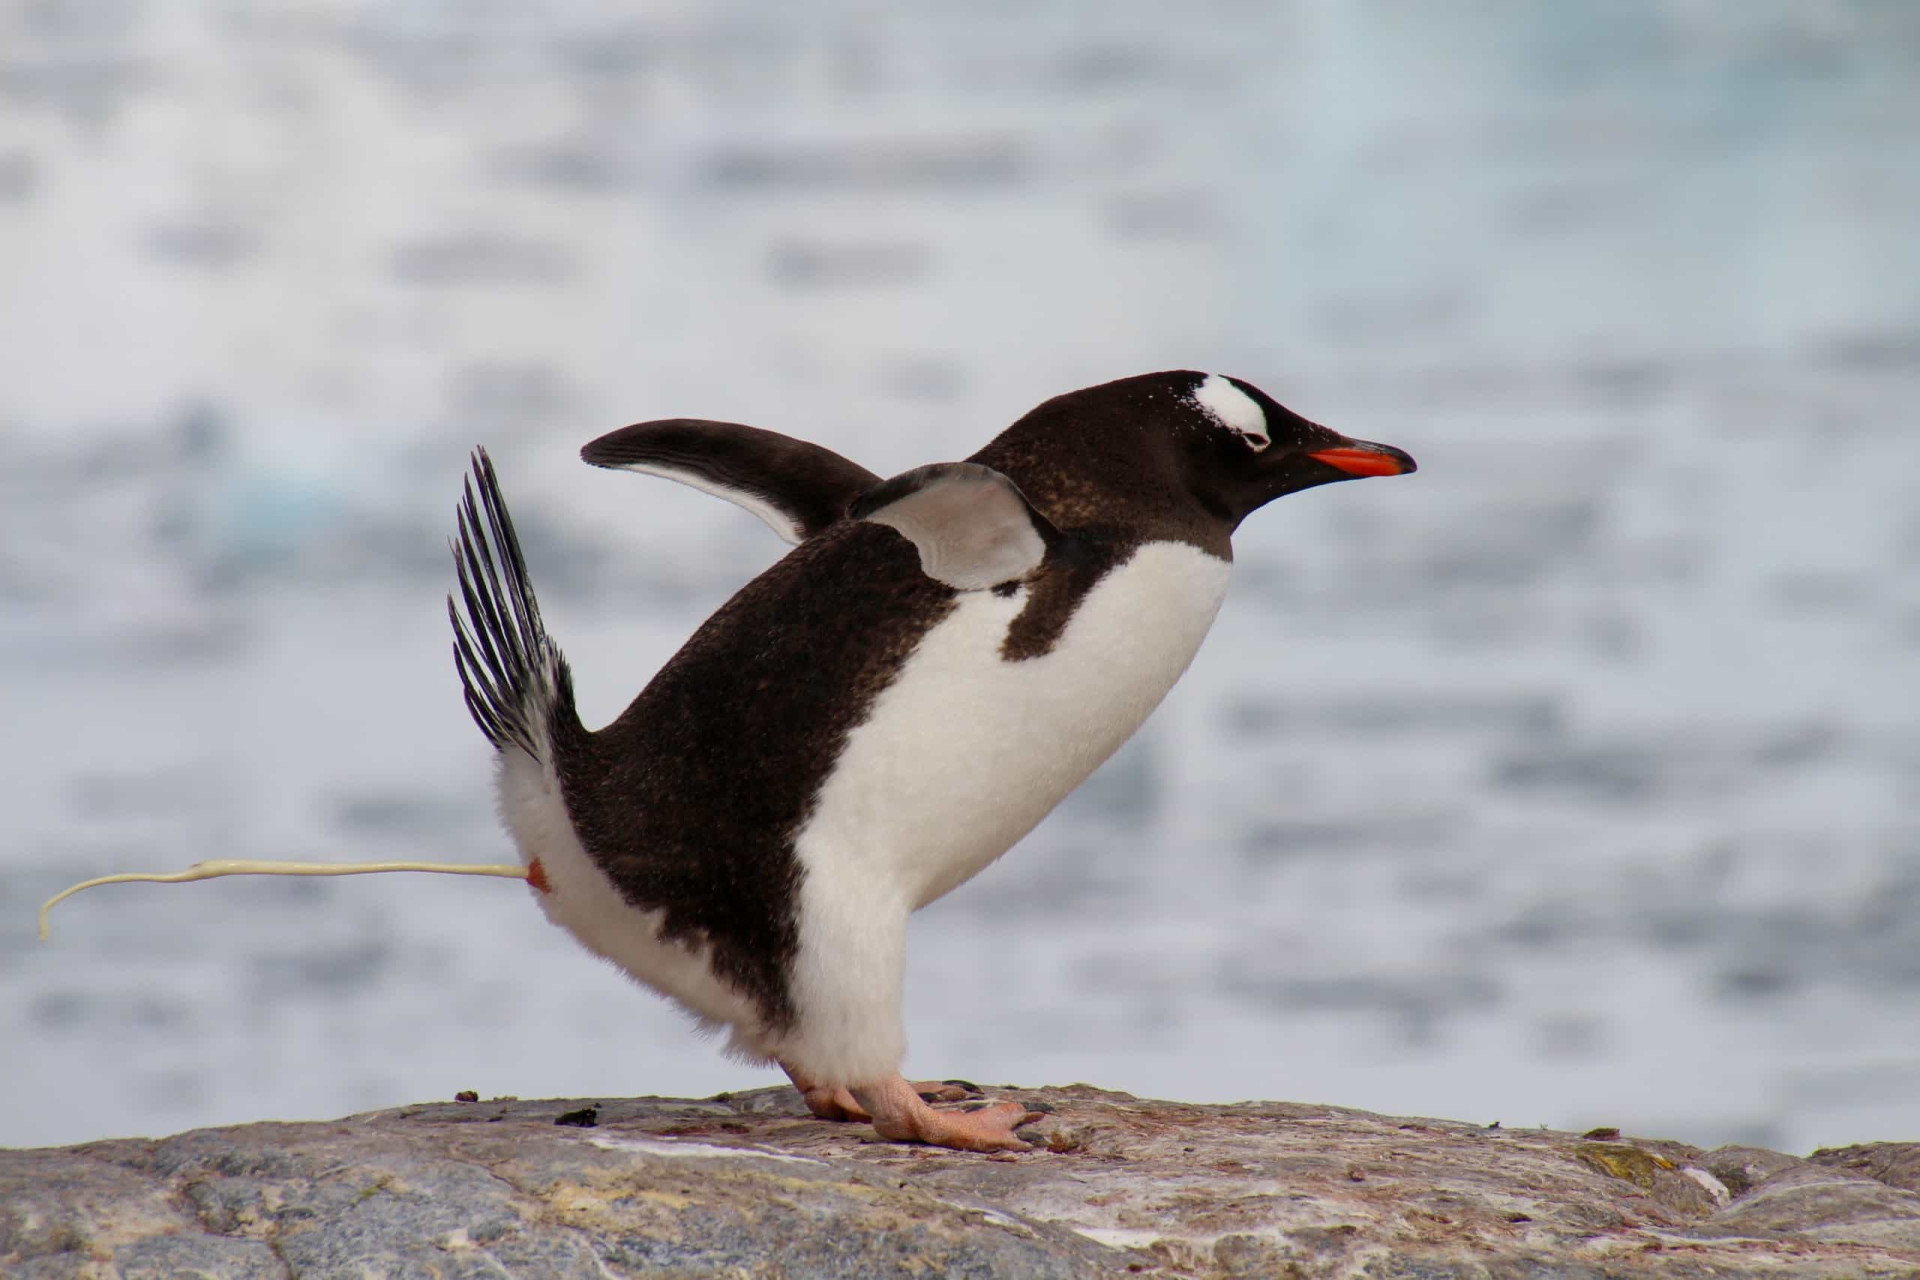 Penguins have an impressive pooing technique. Luckily, someone decided to do a paper on it.<p><a href="https://www.msn.com/en-au/community/channel/vid-7xx8mnucu55yw63we9va2gwr7uihbxwc68fxqp25x6tg4ftibpra?cvid=94631541bc0f4f89bfd59158d696ad7e">Follow us and access great exclusive content every day</a></p>